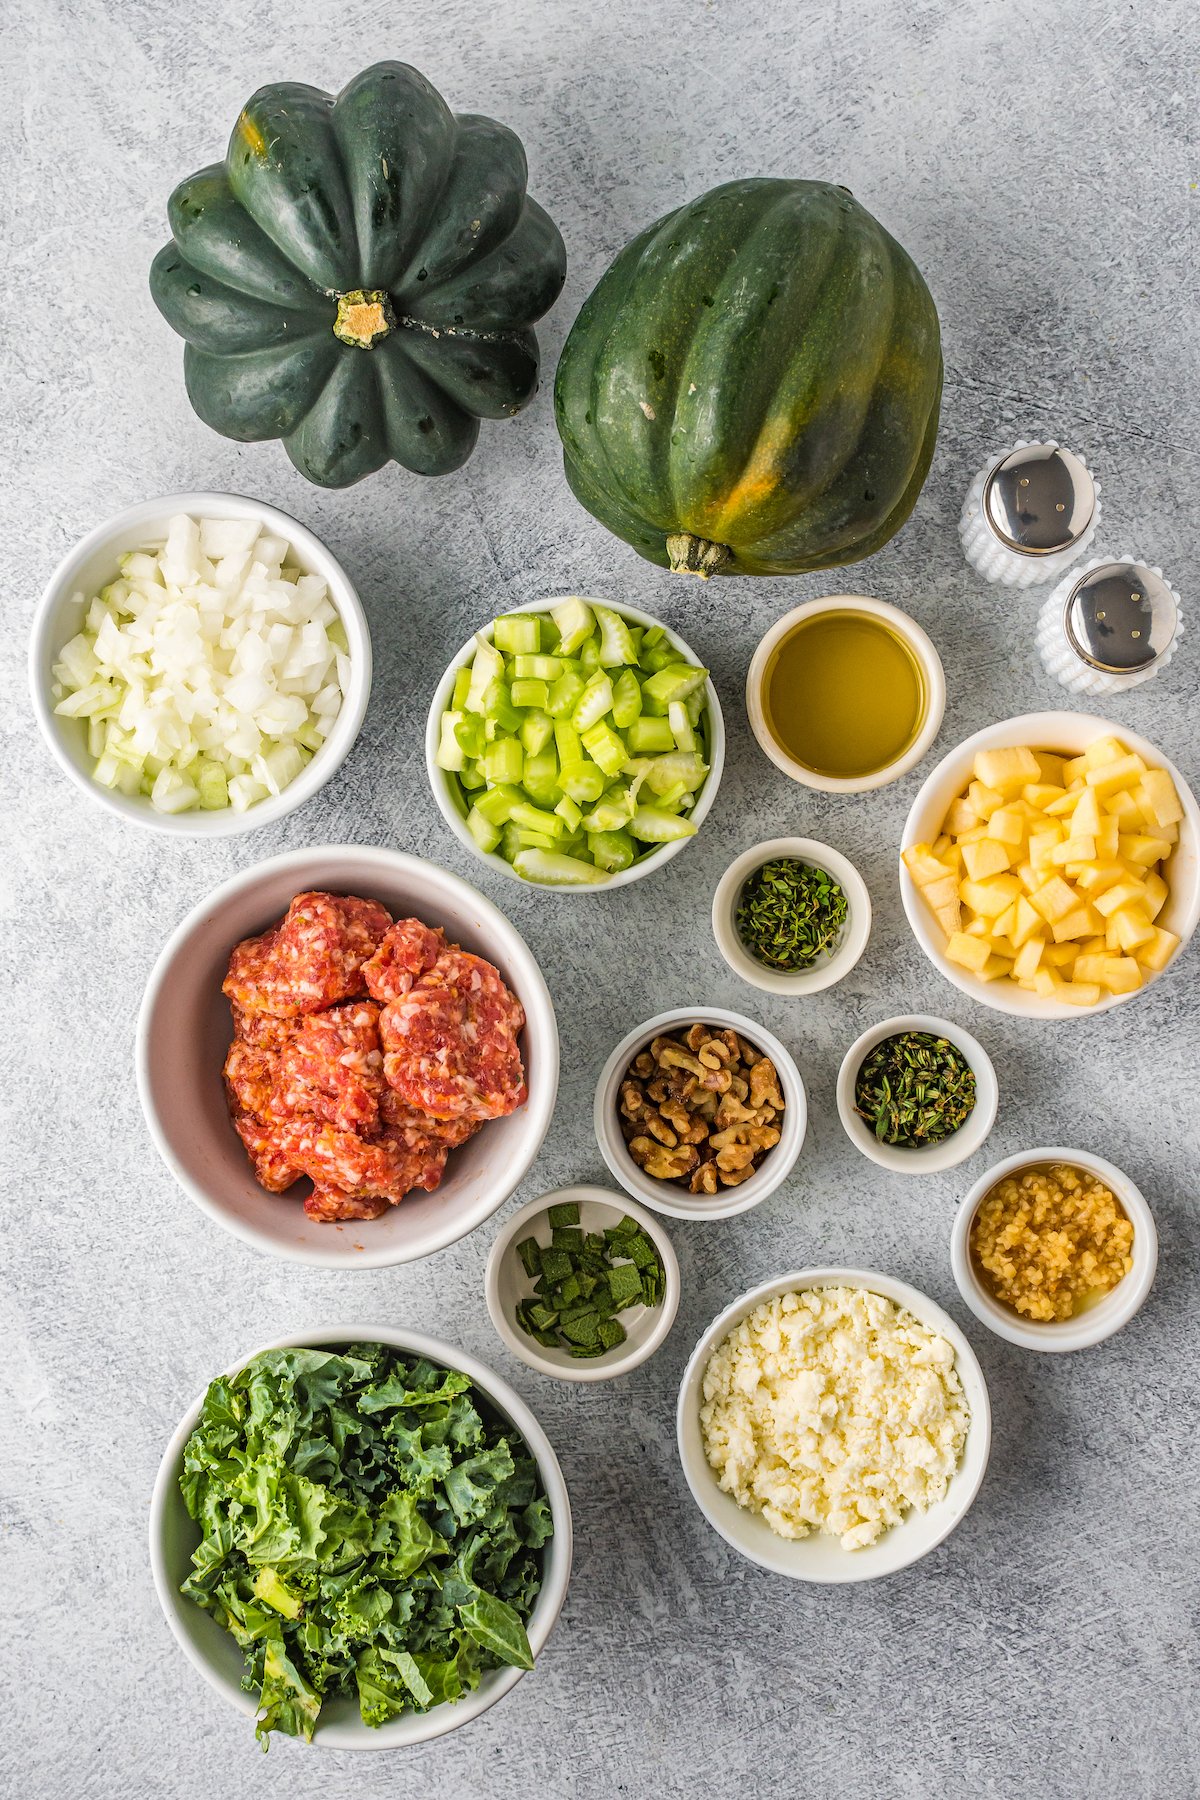 The ingredients for sausage stuffed squash: Whole acorn squash, salt, pepper, chopped apple. olive oil, minced herbs, garlic, feta cheese, kale, ground sausage, walnuts, celery, and onions.